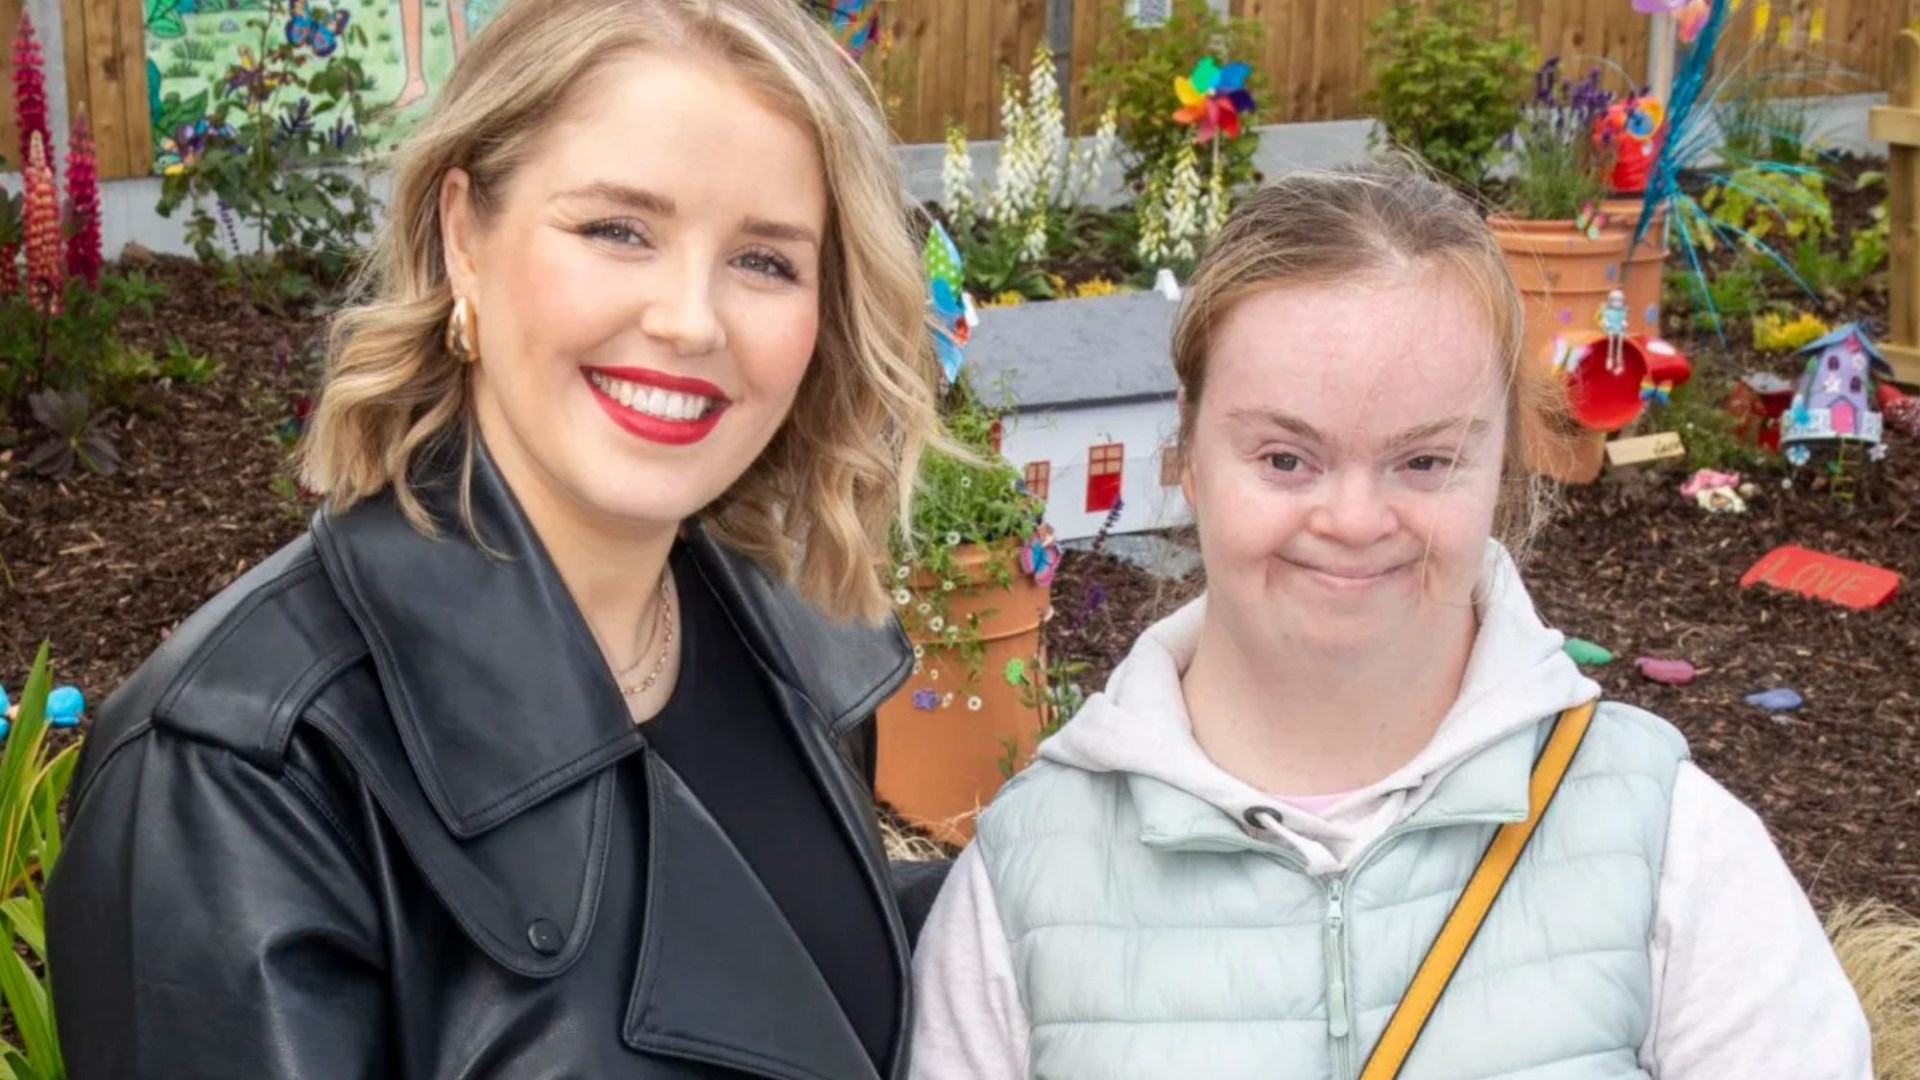 Fair City star pictured at opening of Dublin charity’s new sensory garden with number of great features [Video]